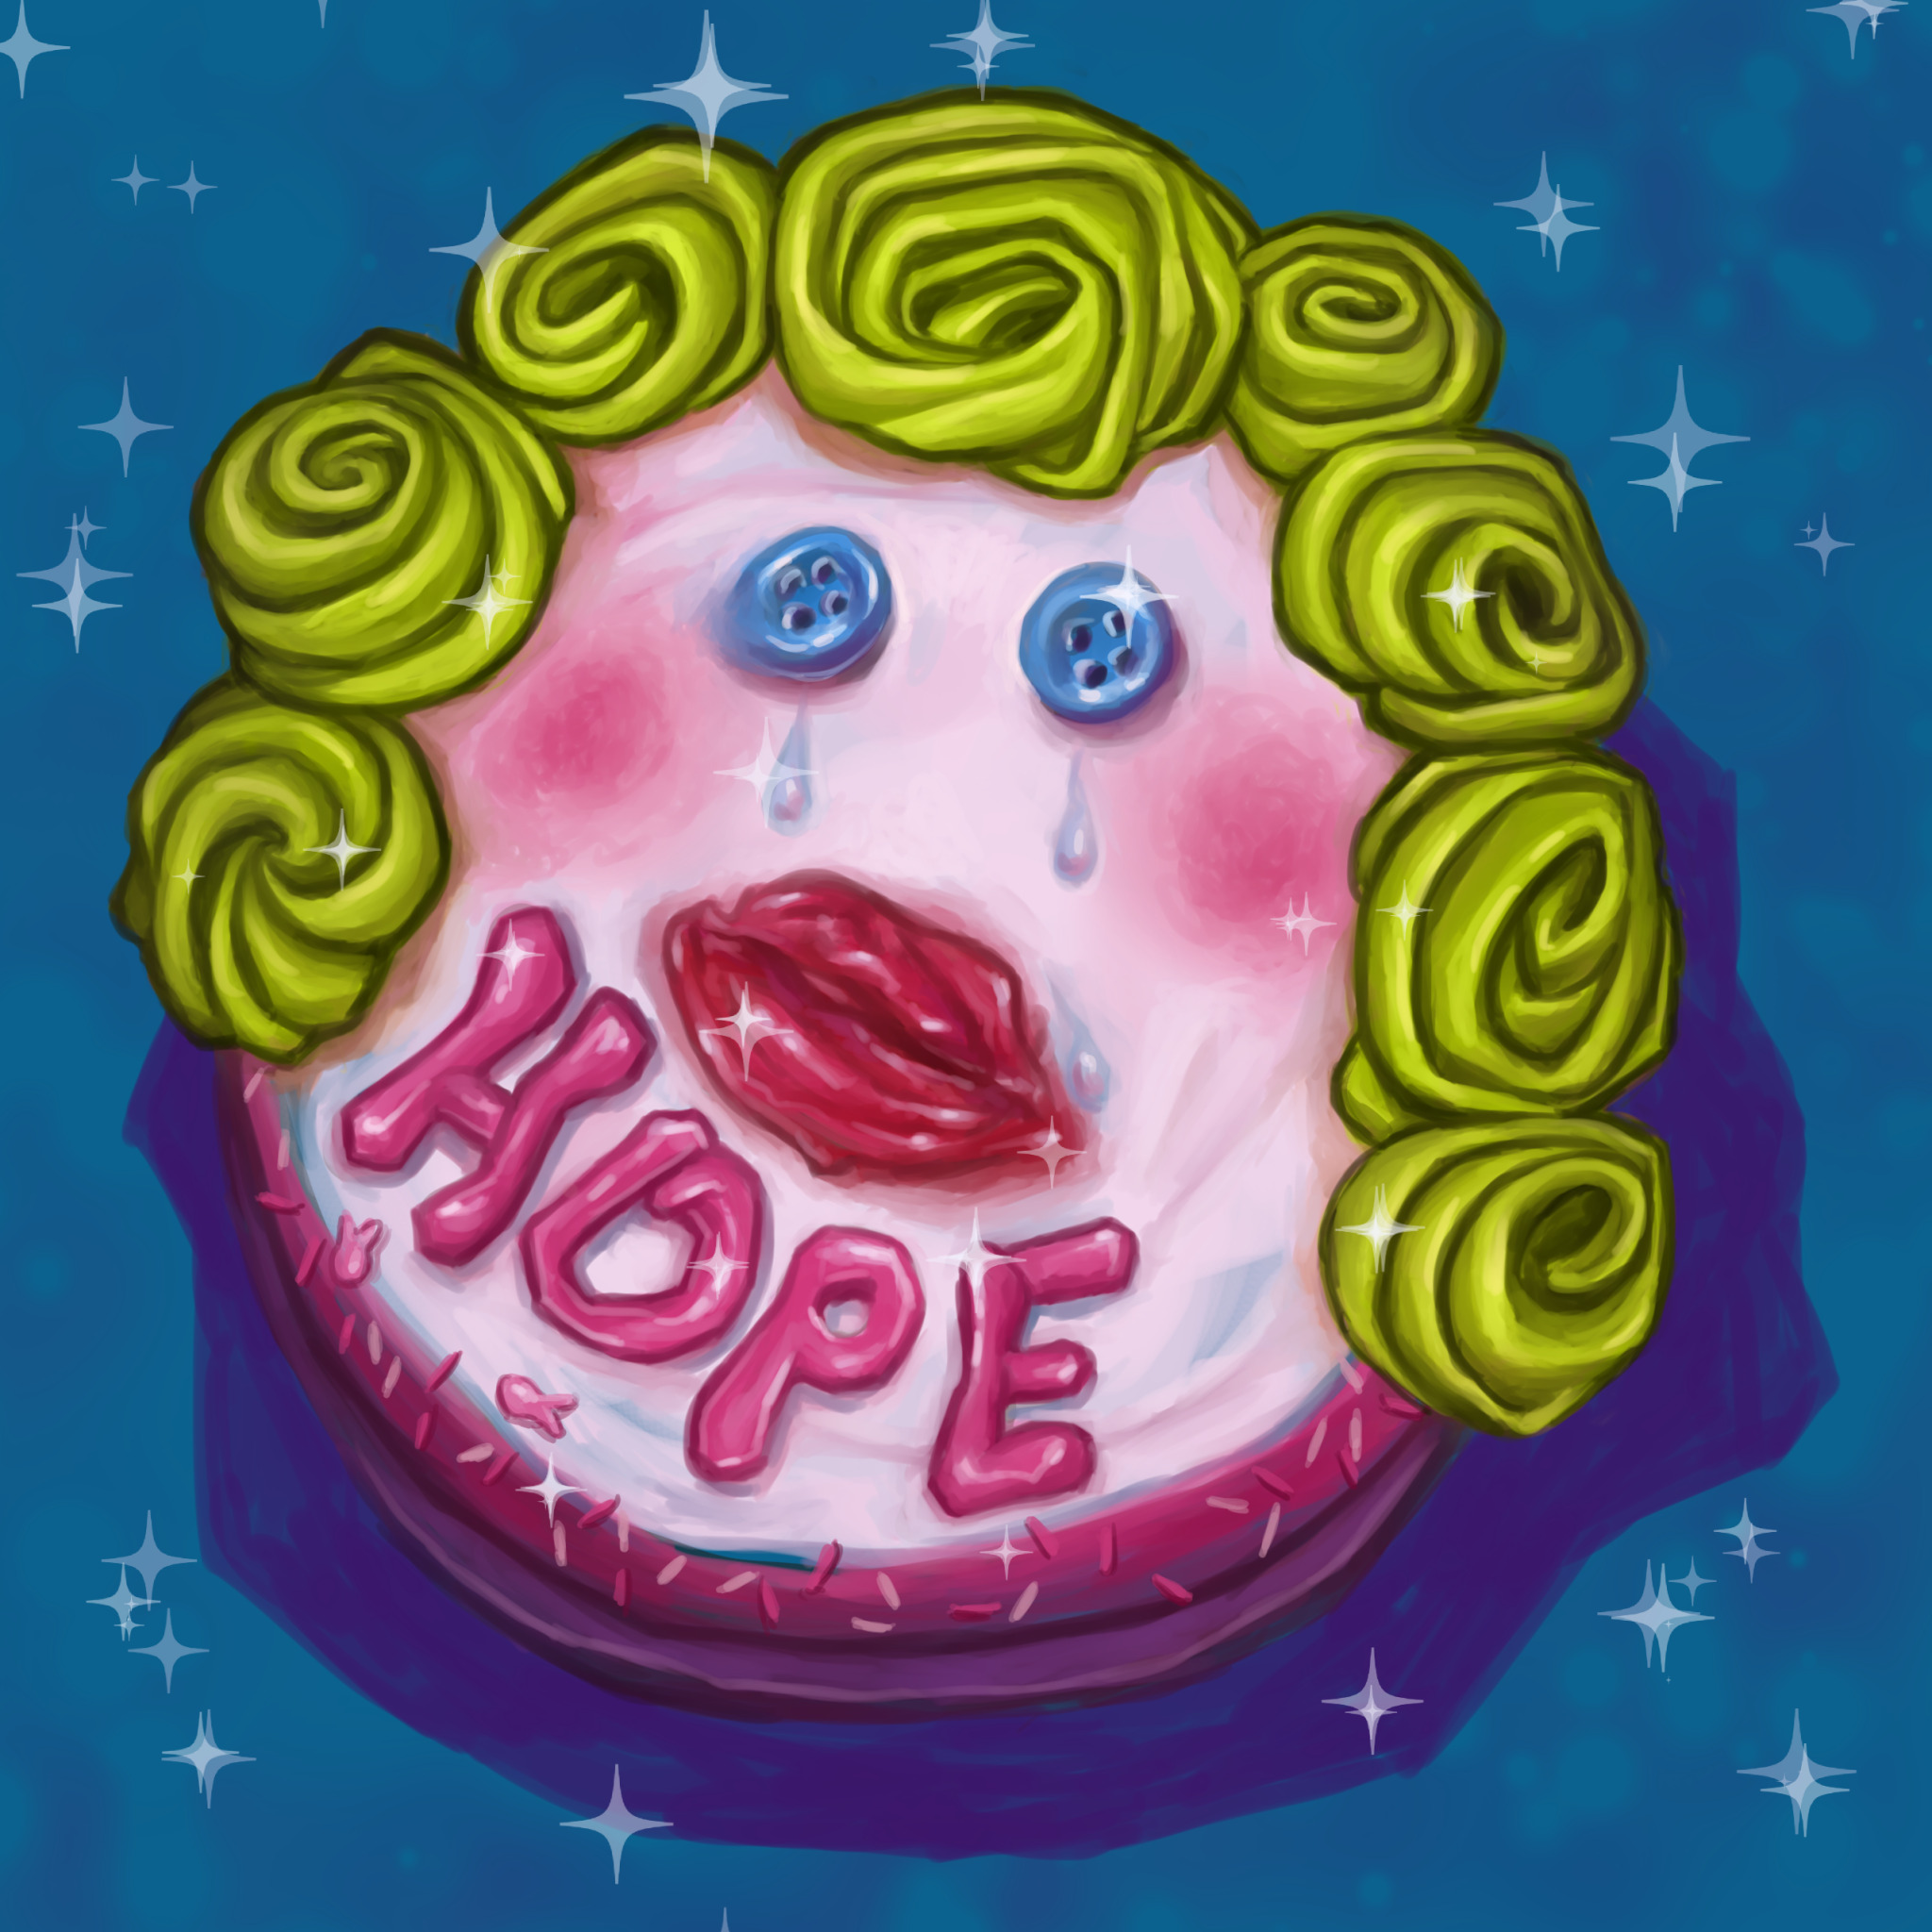 Digital painting of a cake decorated to look like a blonde white woman's face with tears rolling down its cheeks. There are little pink ribbons on it haphazardly placed, and the word Hope is written on the bottom half.